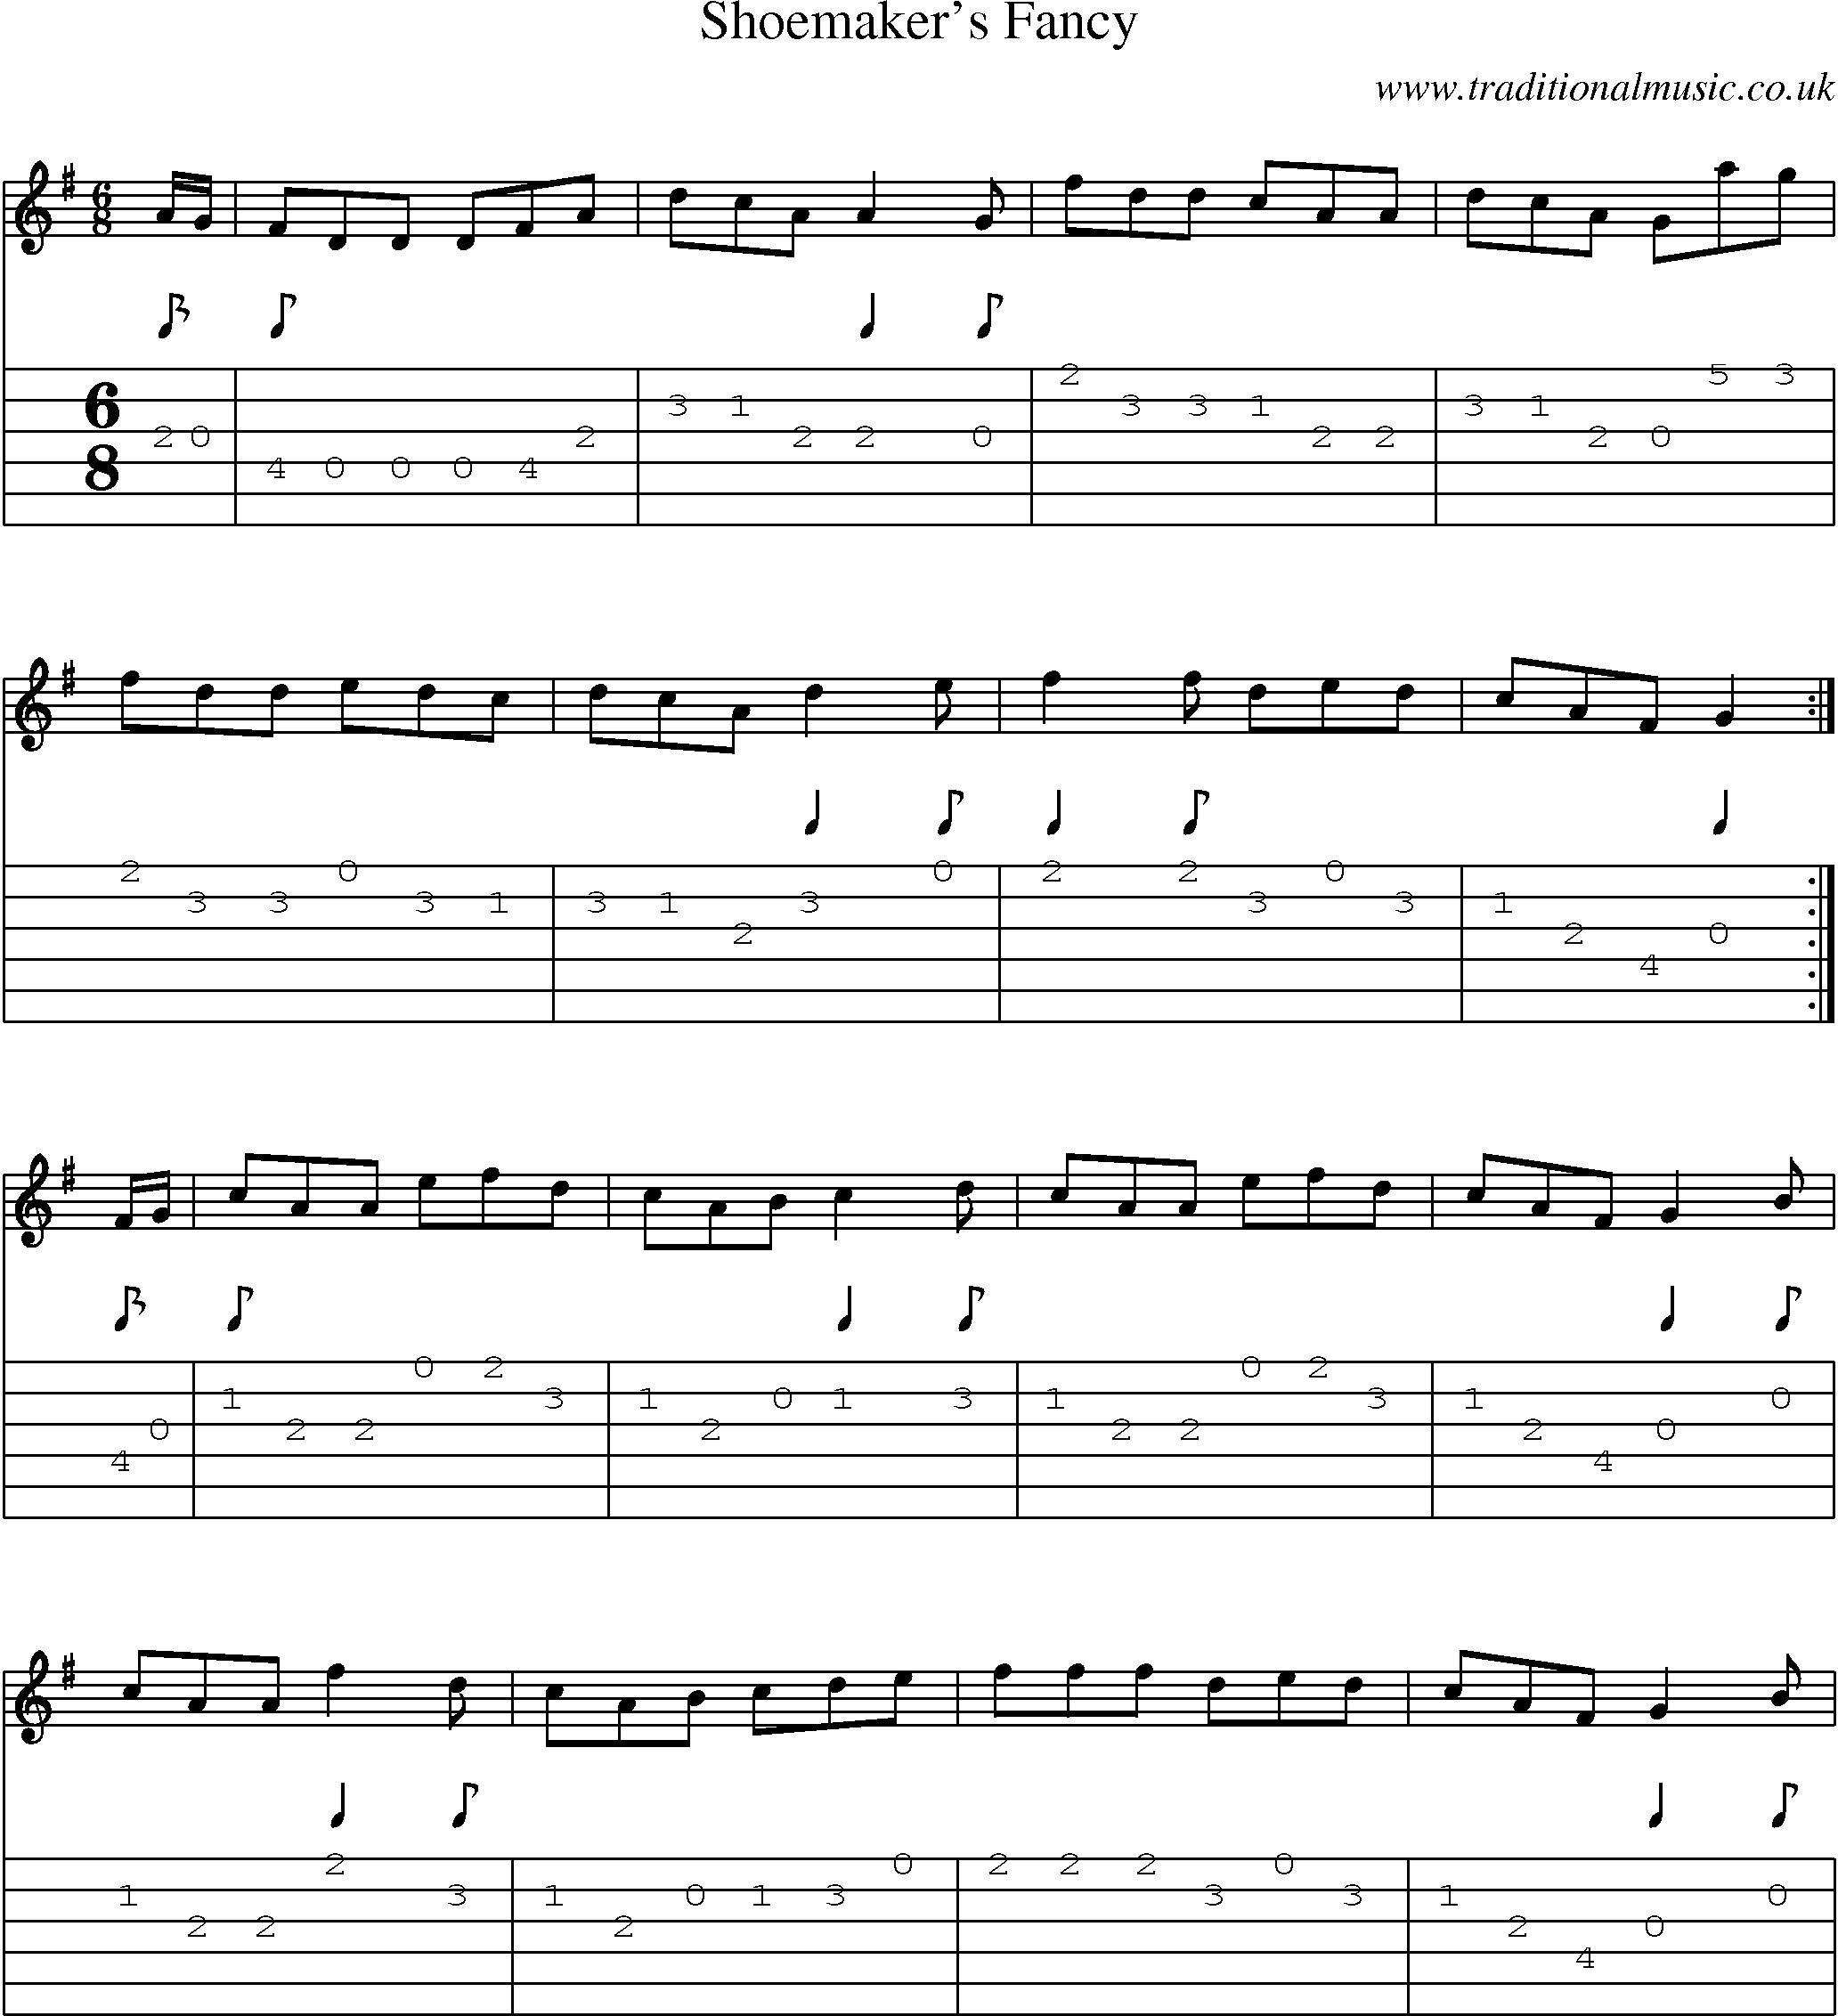 Music Score and Guitar Tabs for Shoemakers Fancy